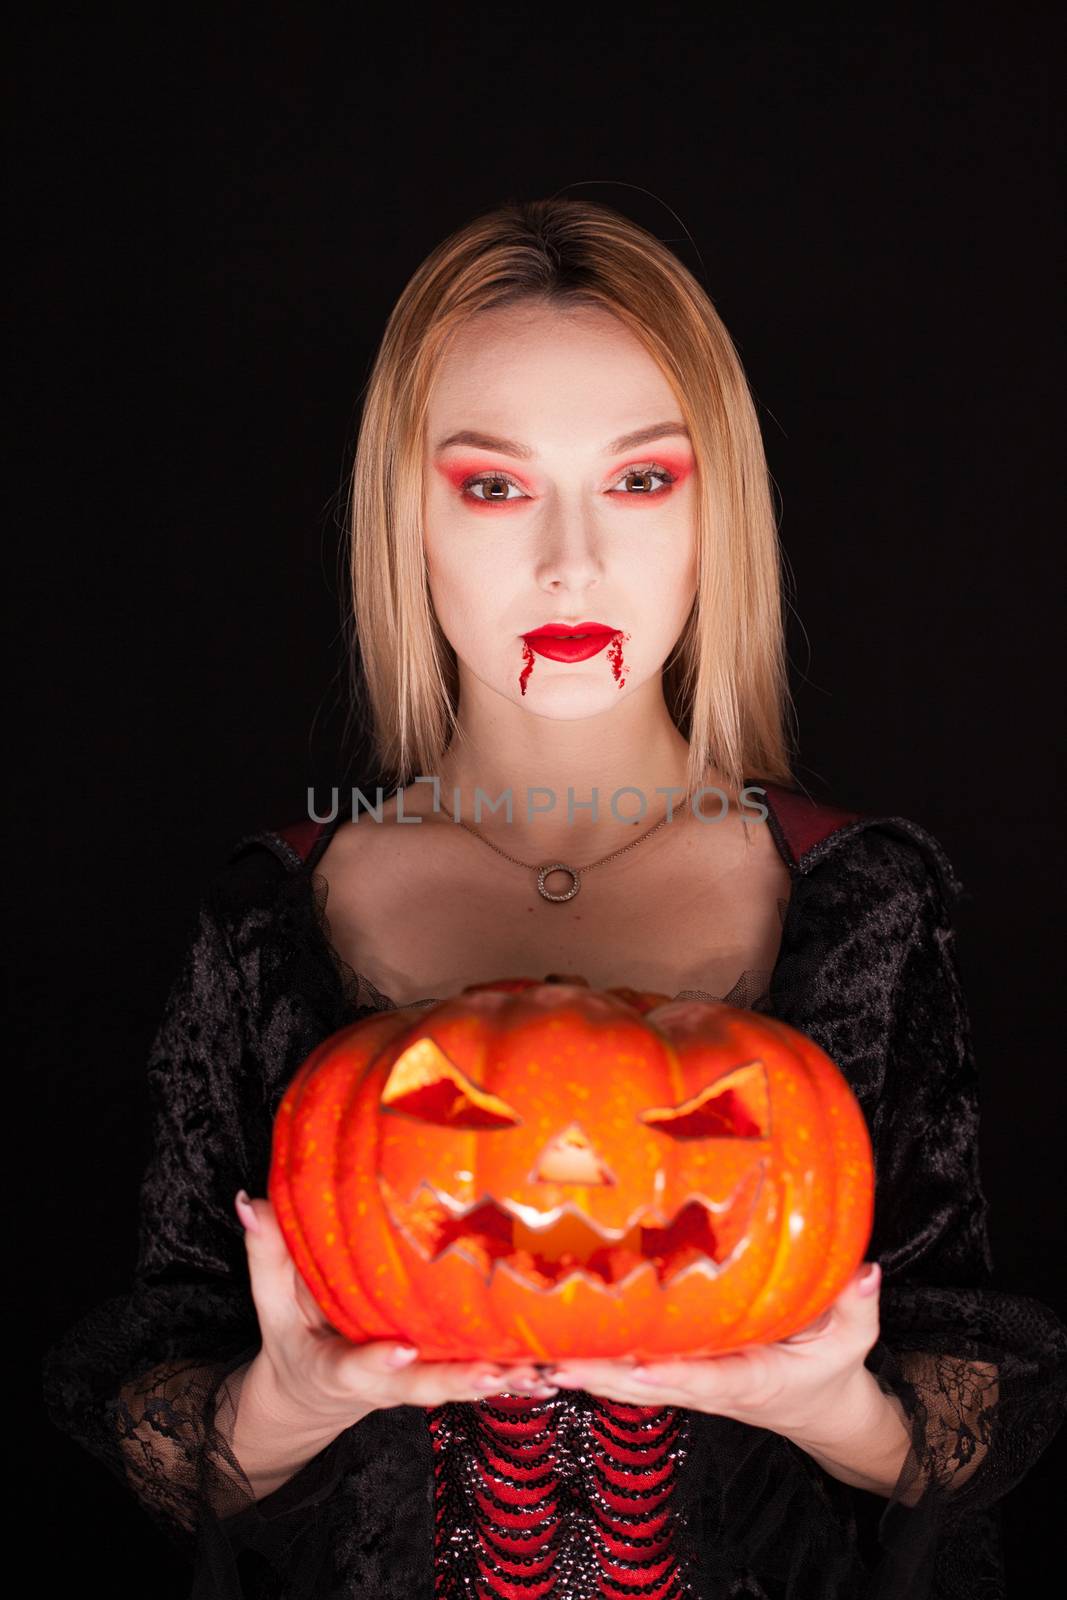 Beautiful girl dressed up like a vampire holding a pumpkin for halloween over black background.